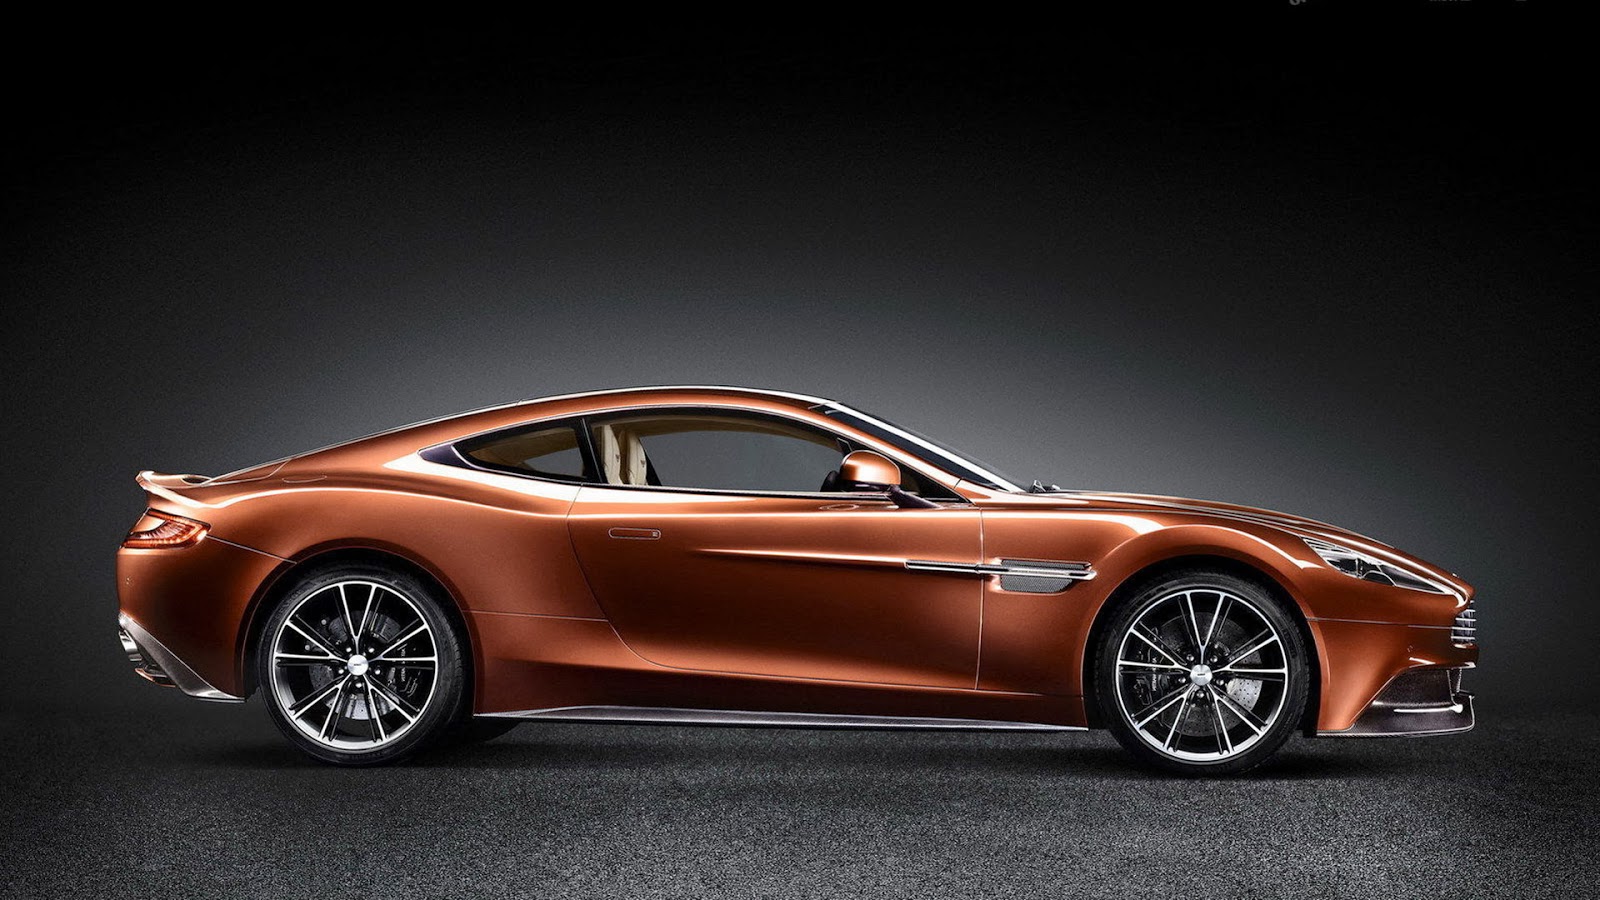 http://www.crazywallpapers.in/2014/02/aston-martin-vanquish-free-wallpapers.html